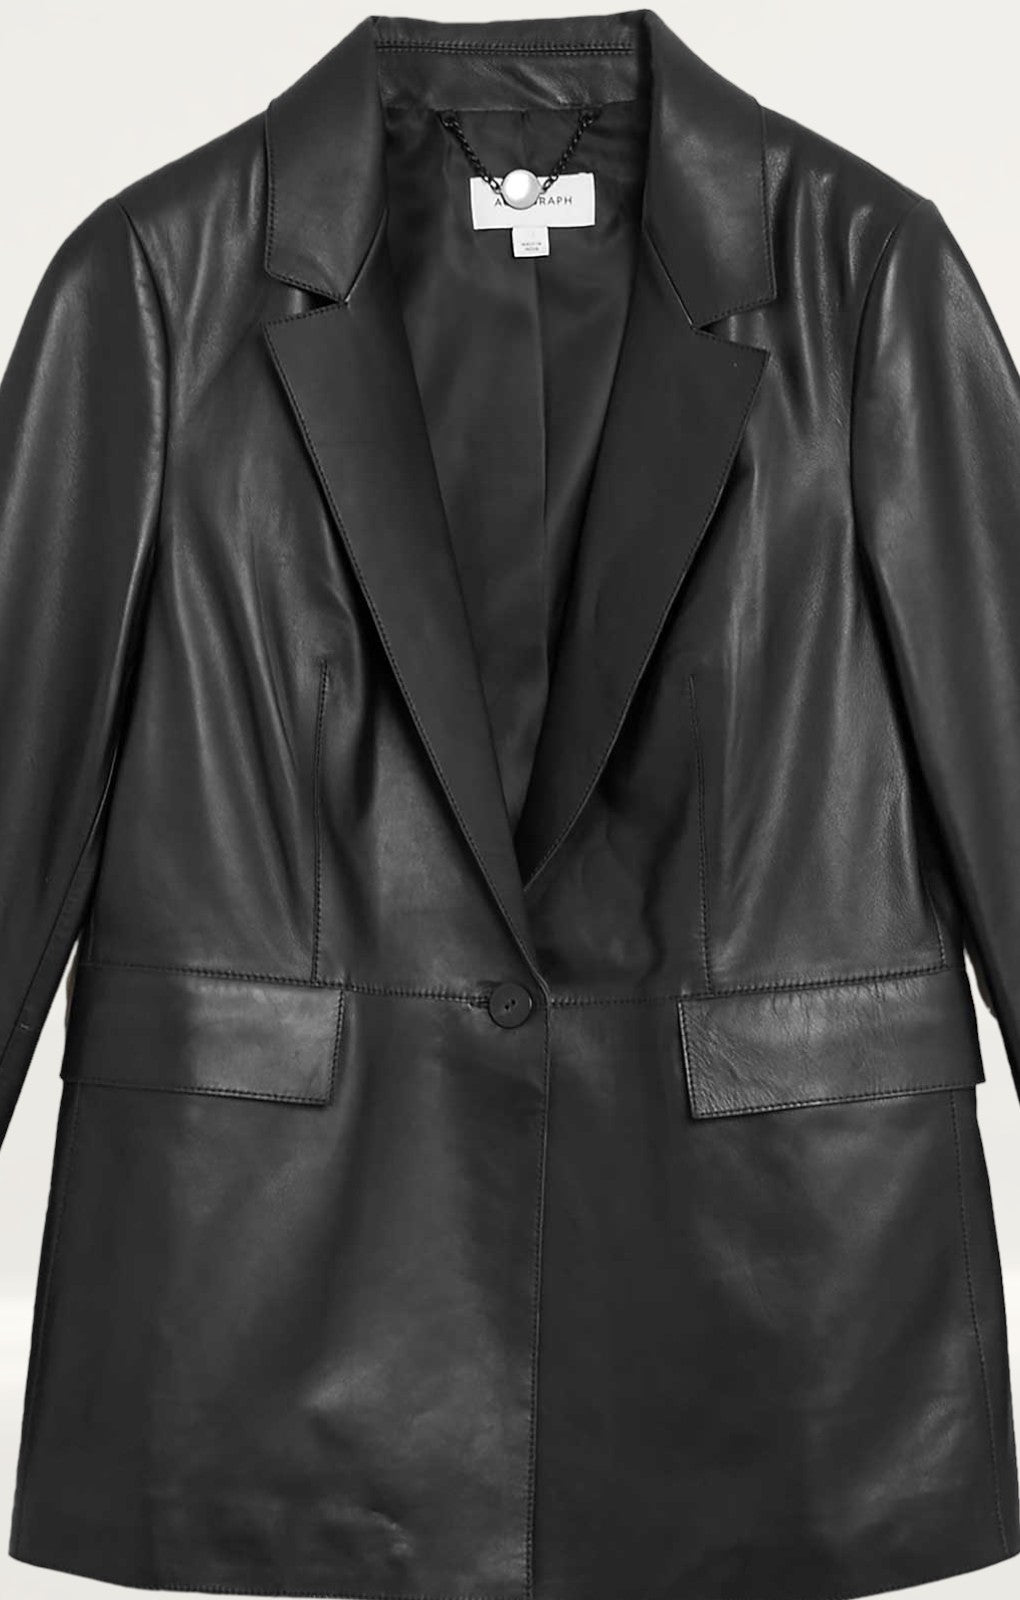 M&S Leather Single Breasted Blazer product image